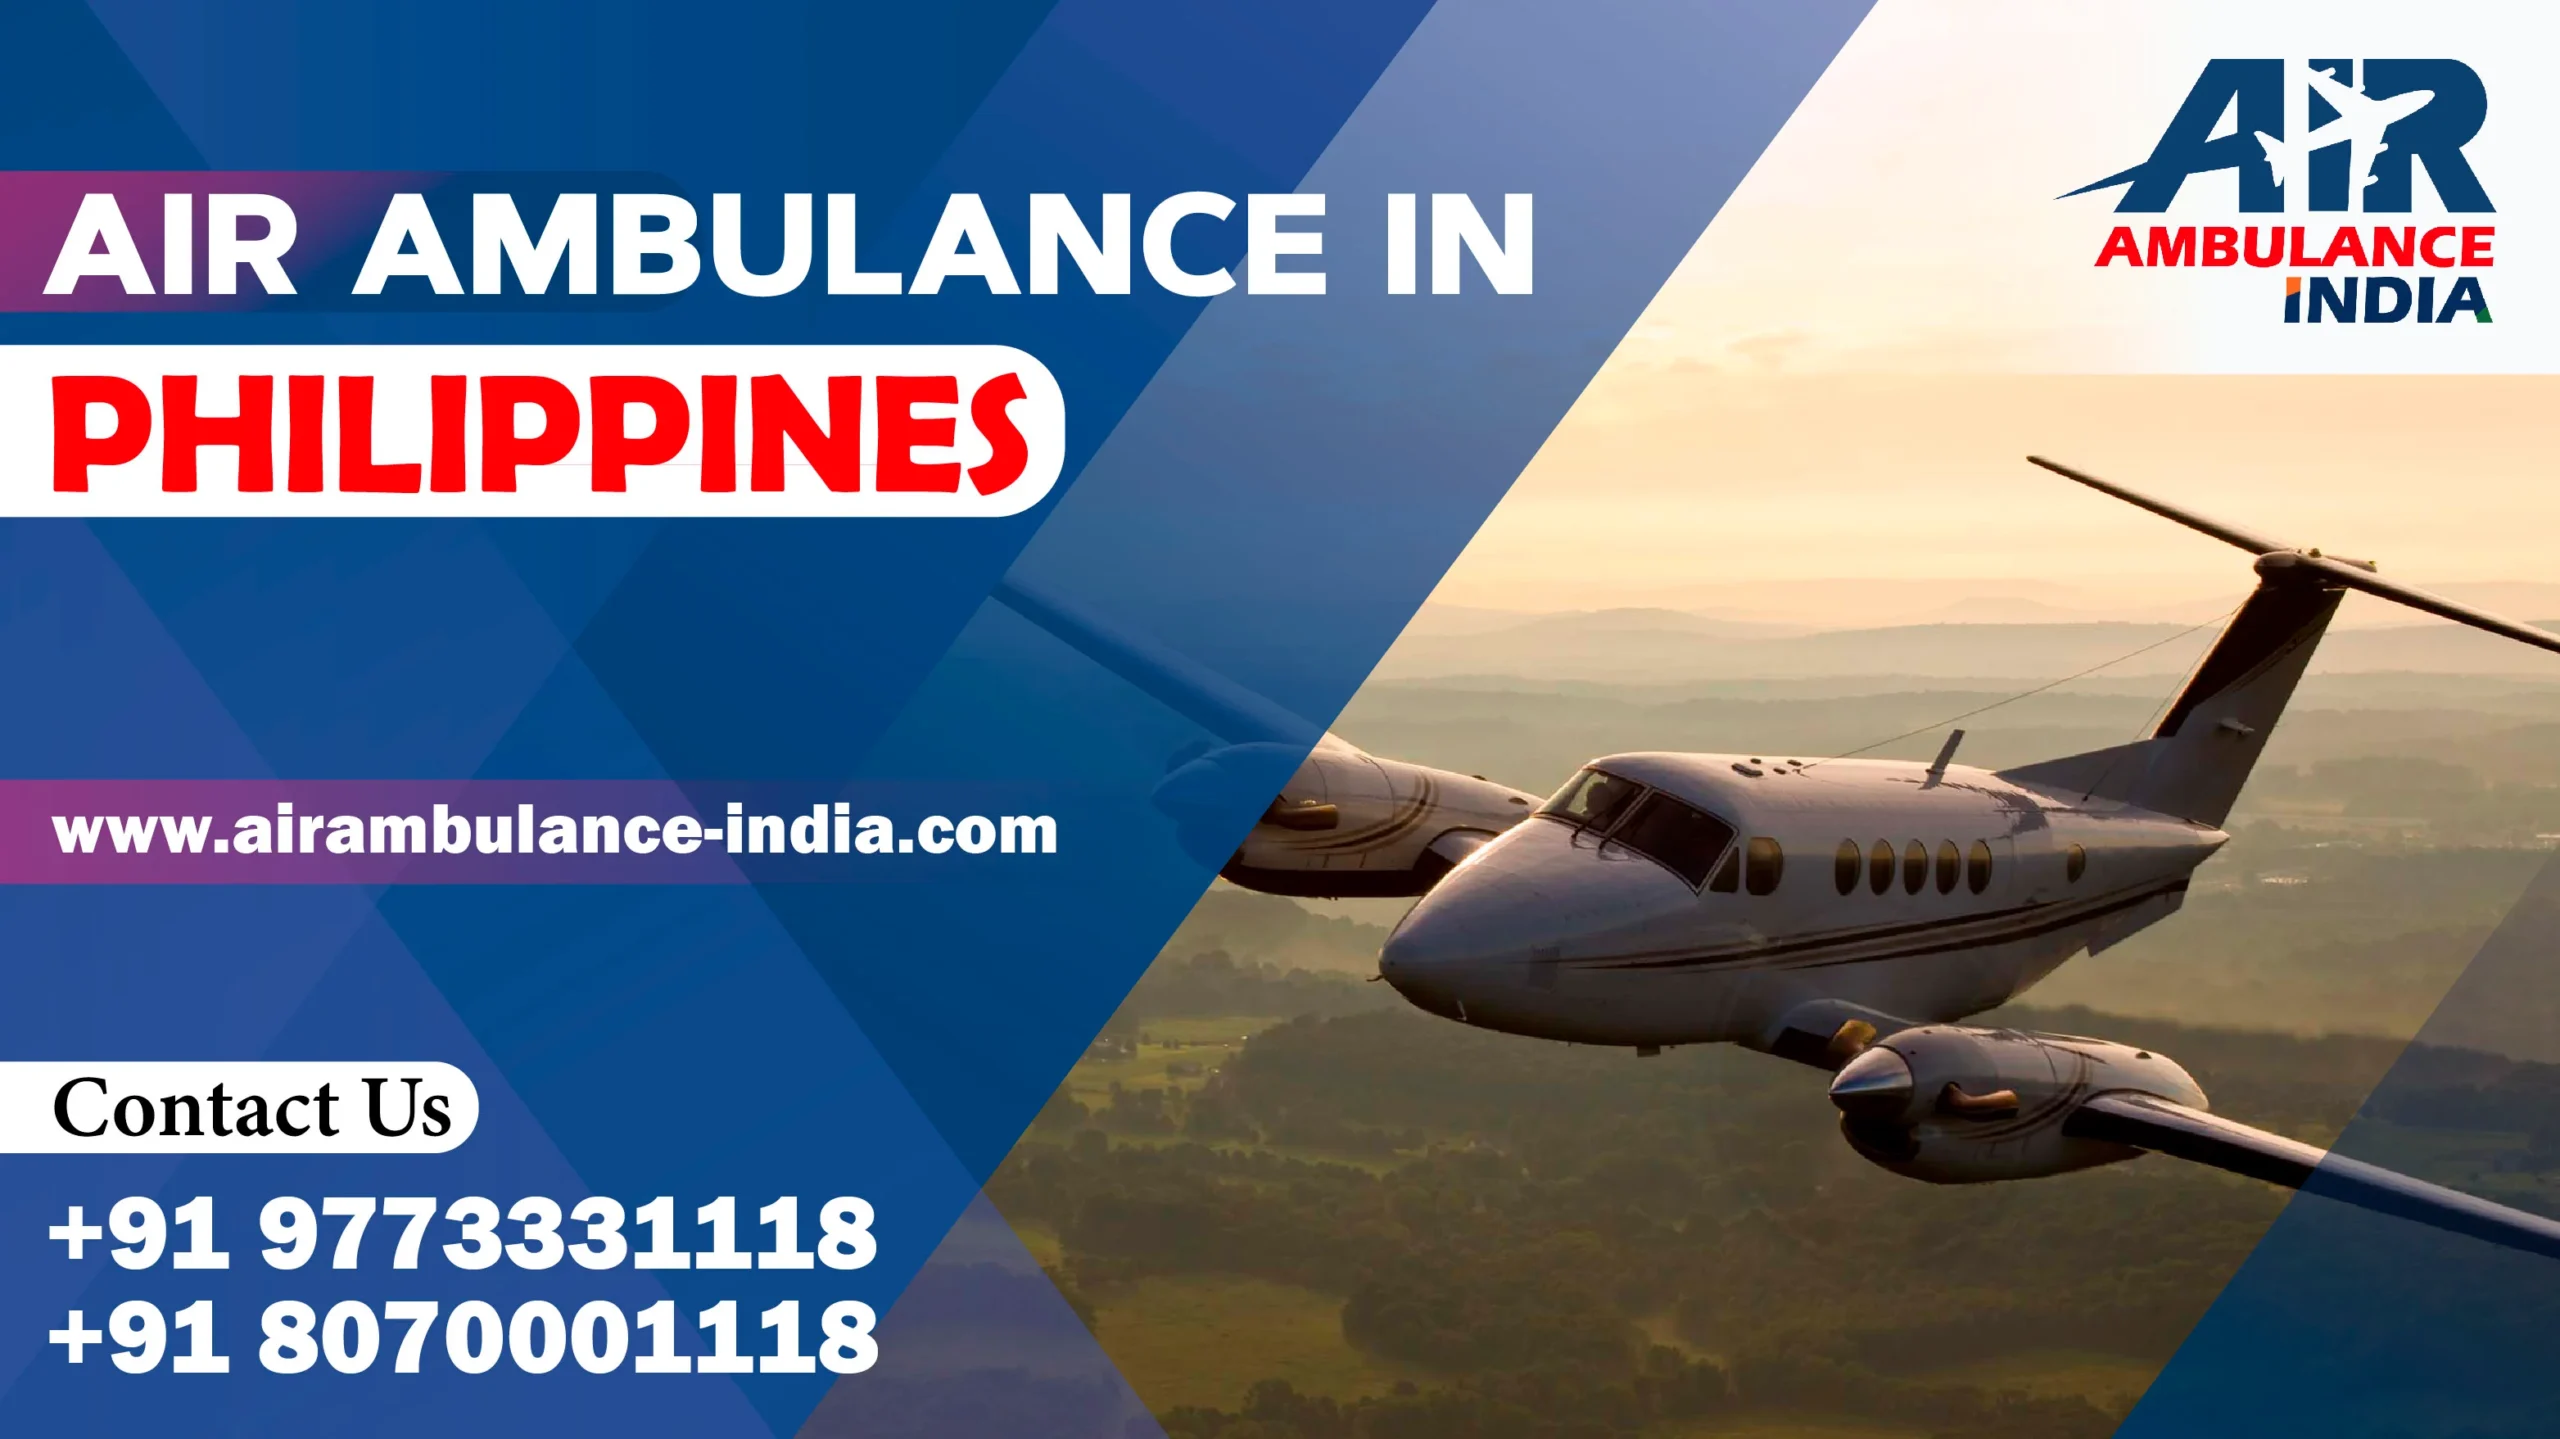 Air Ambulance Services in Philippines